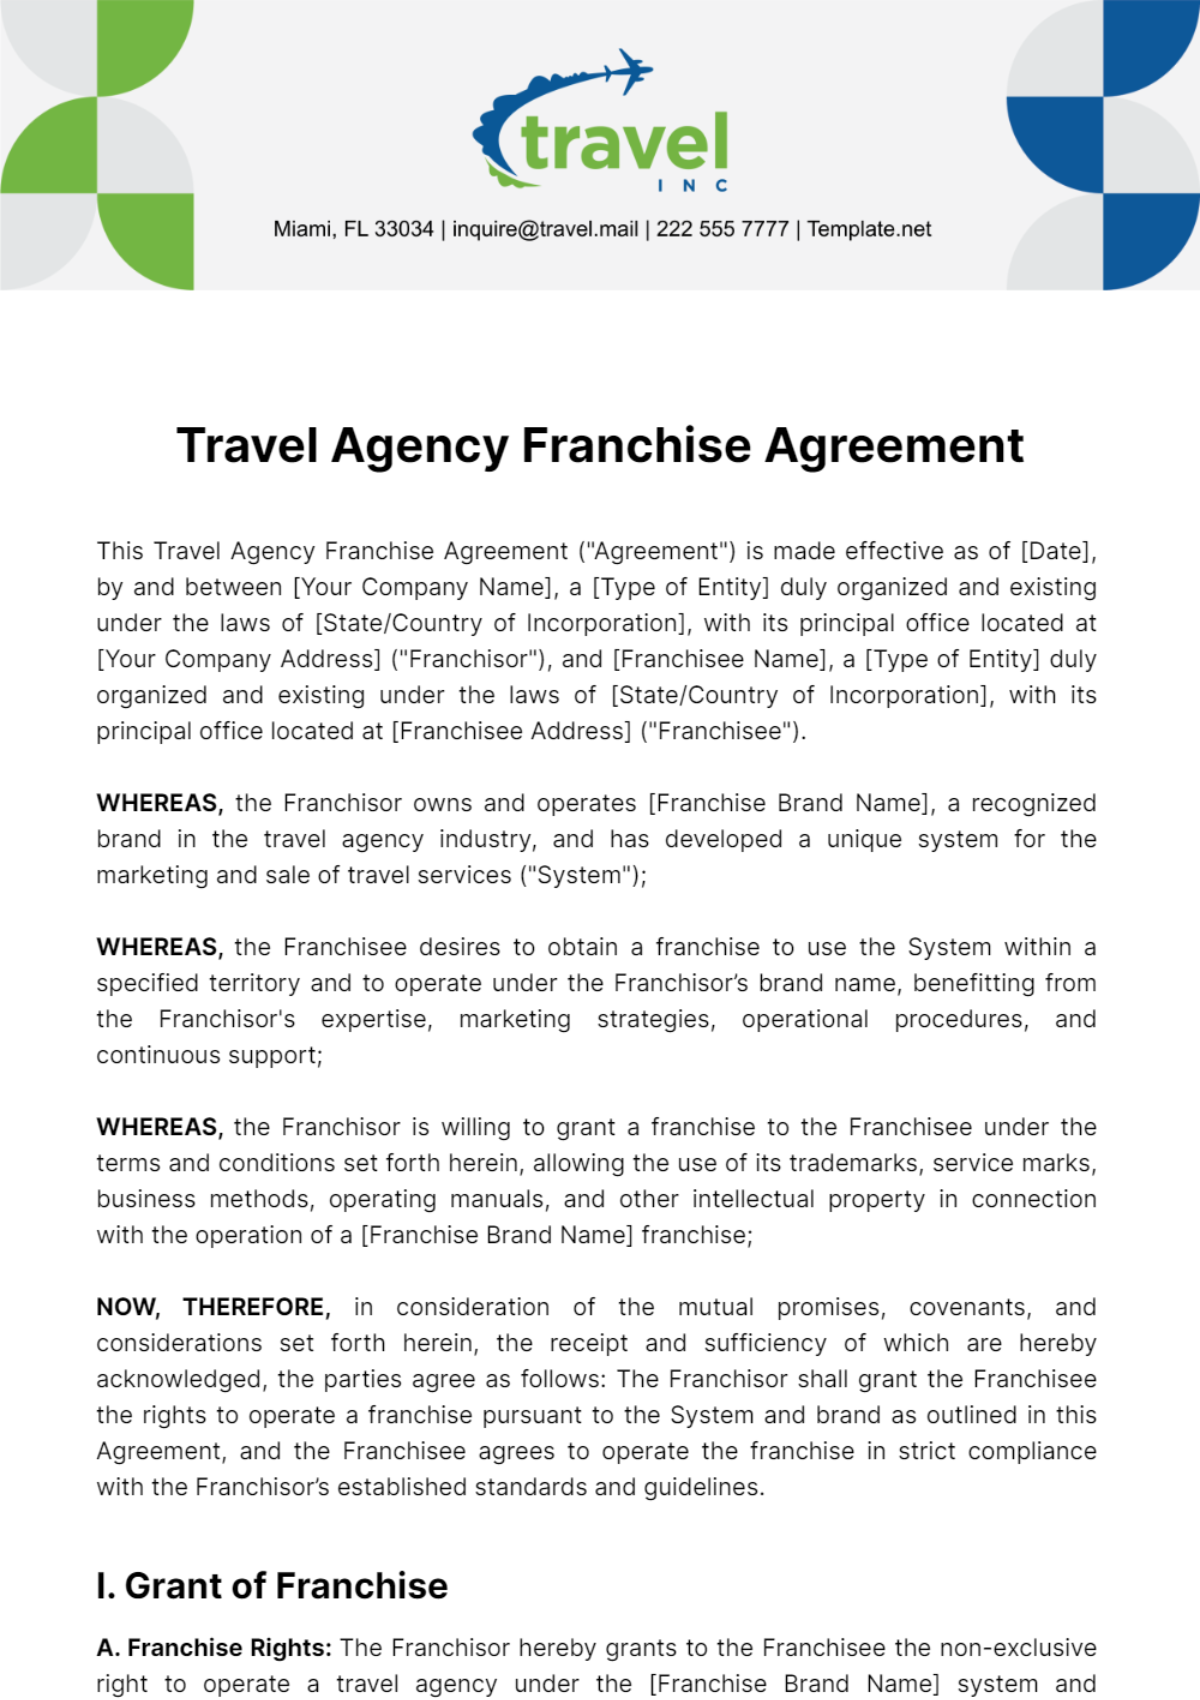 Travel Agency Franchise Agreement Template